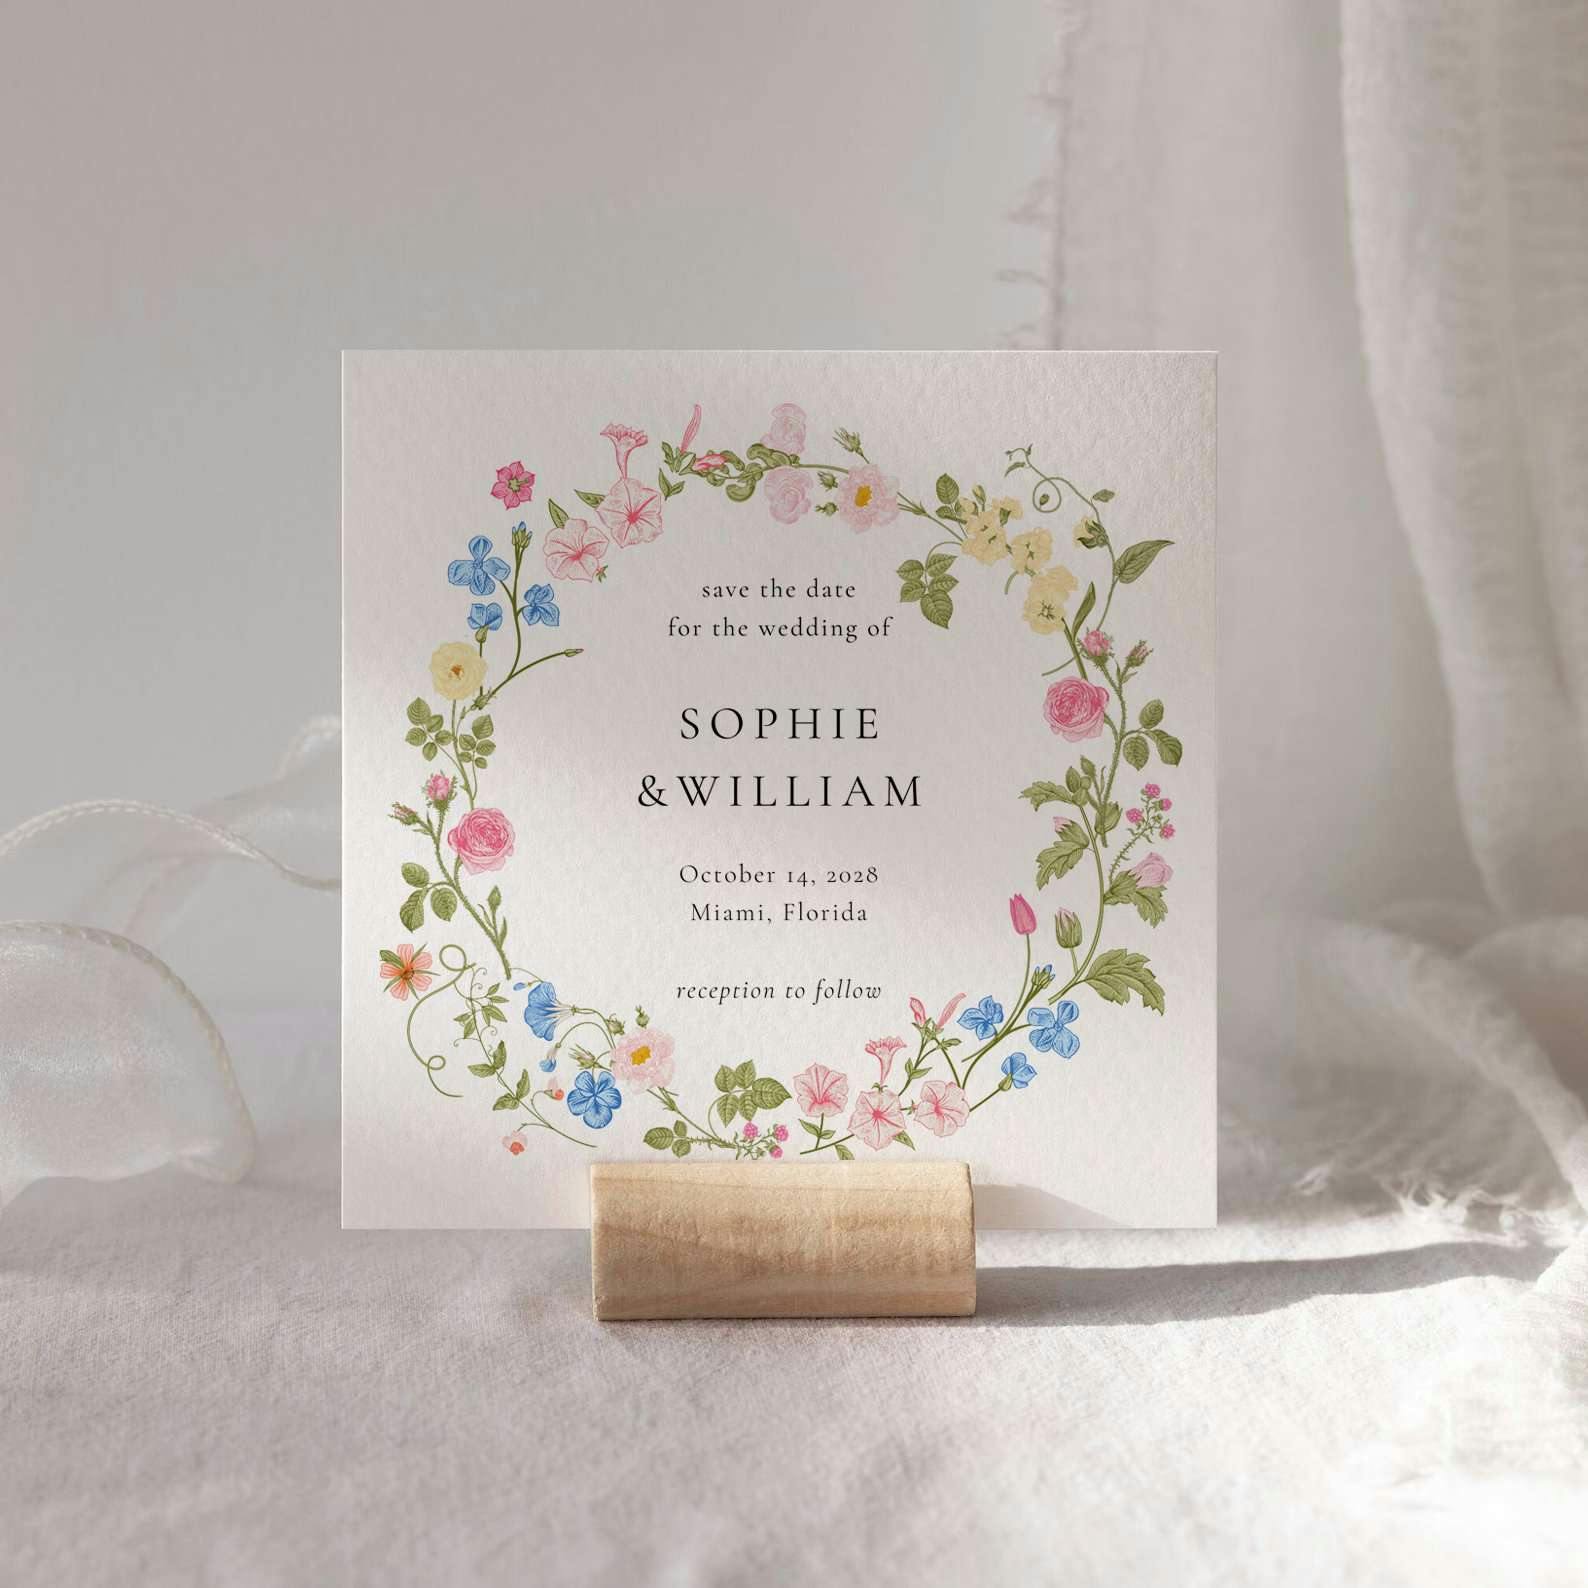 Word Templates for Easy-to-Print Place Cards: Effortless Elegance for Any Event